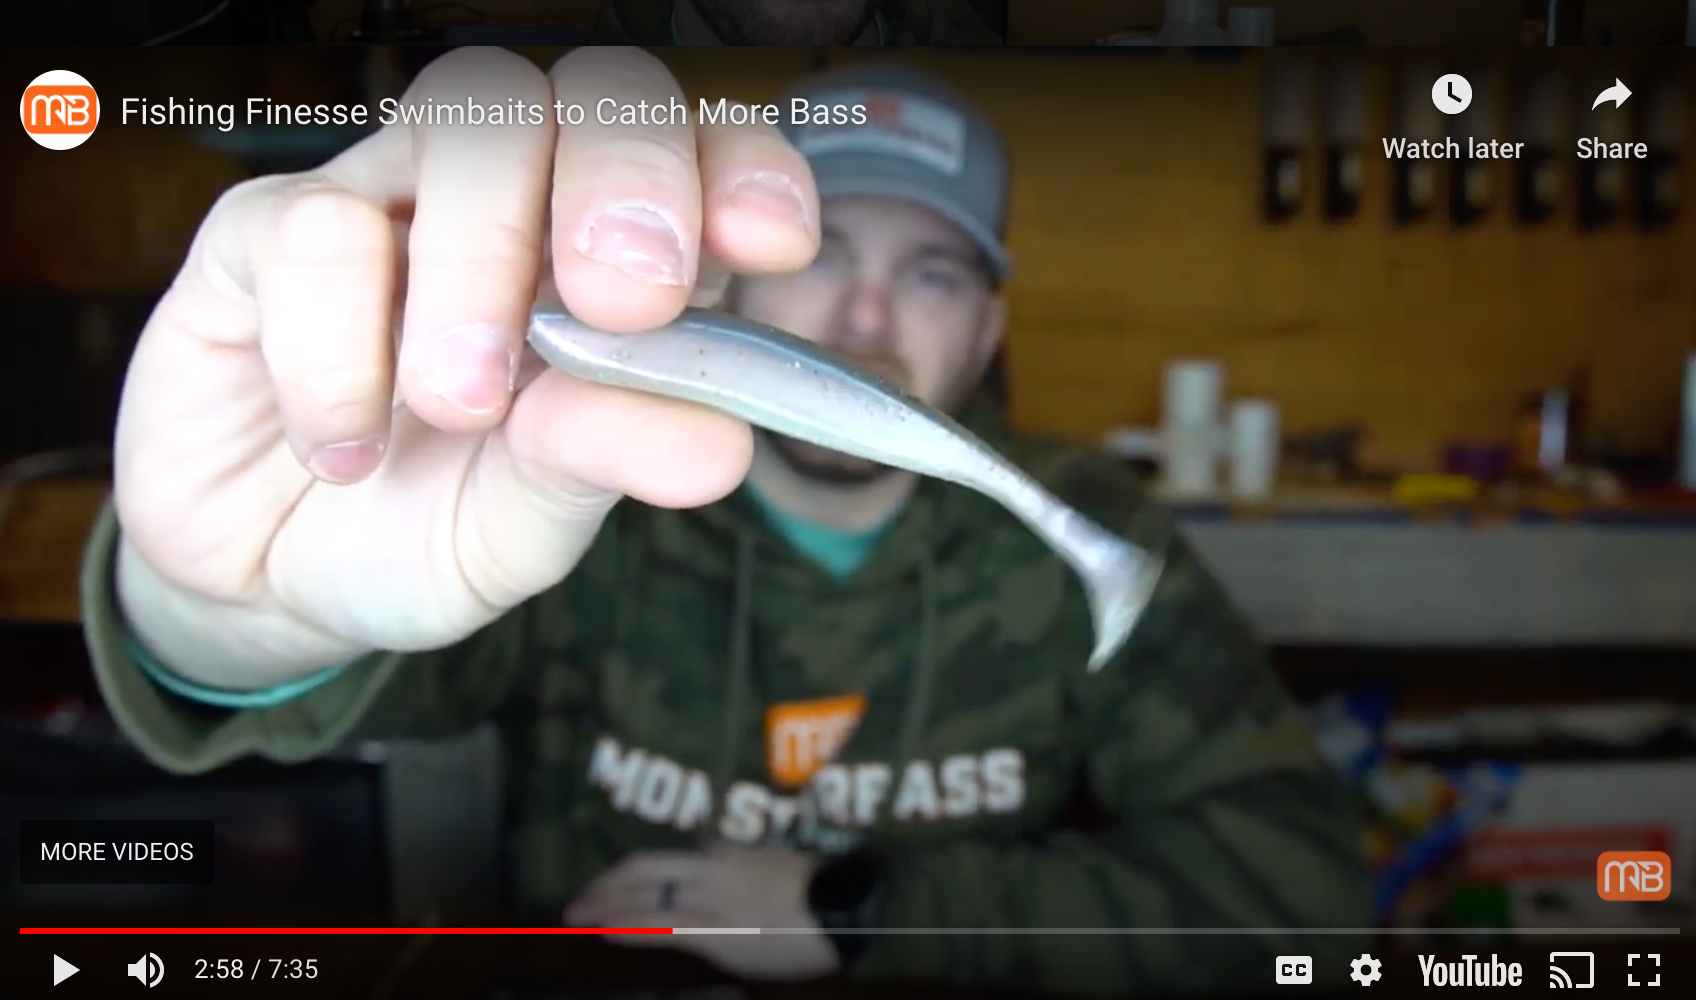 Pro Tips For Catching More Bass Fishing With Finesse Swimbaits